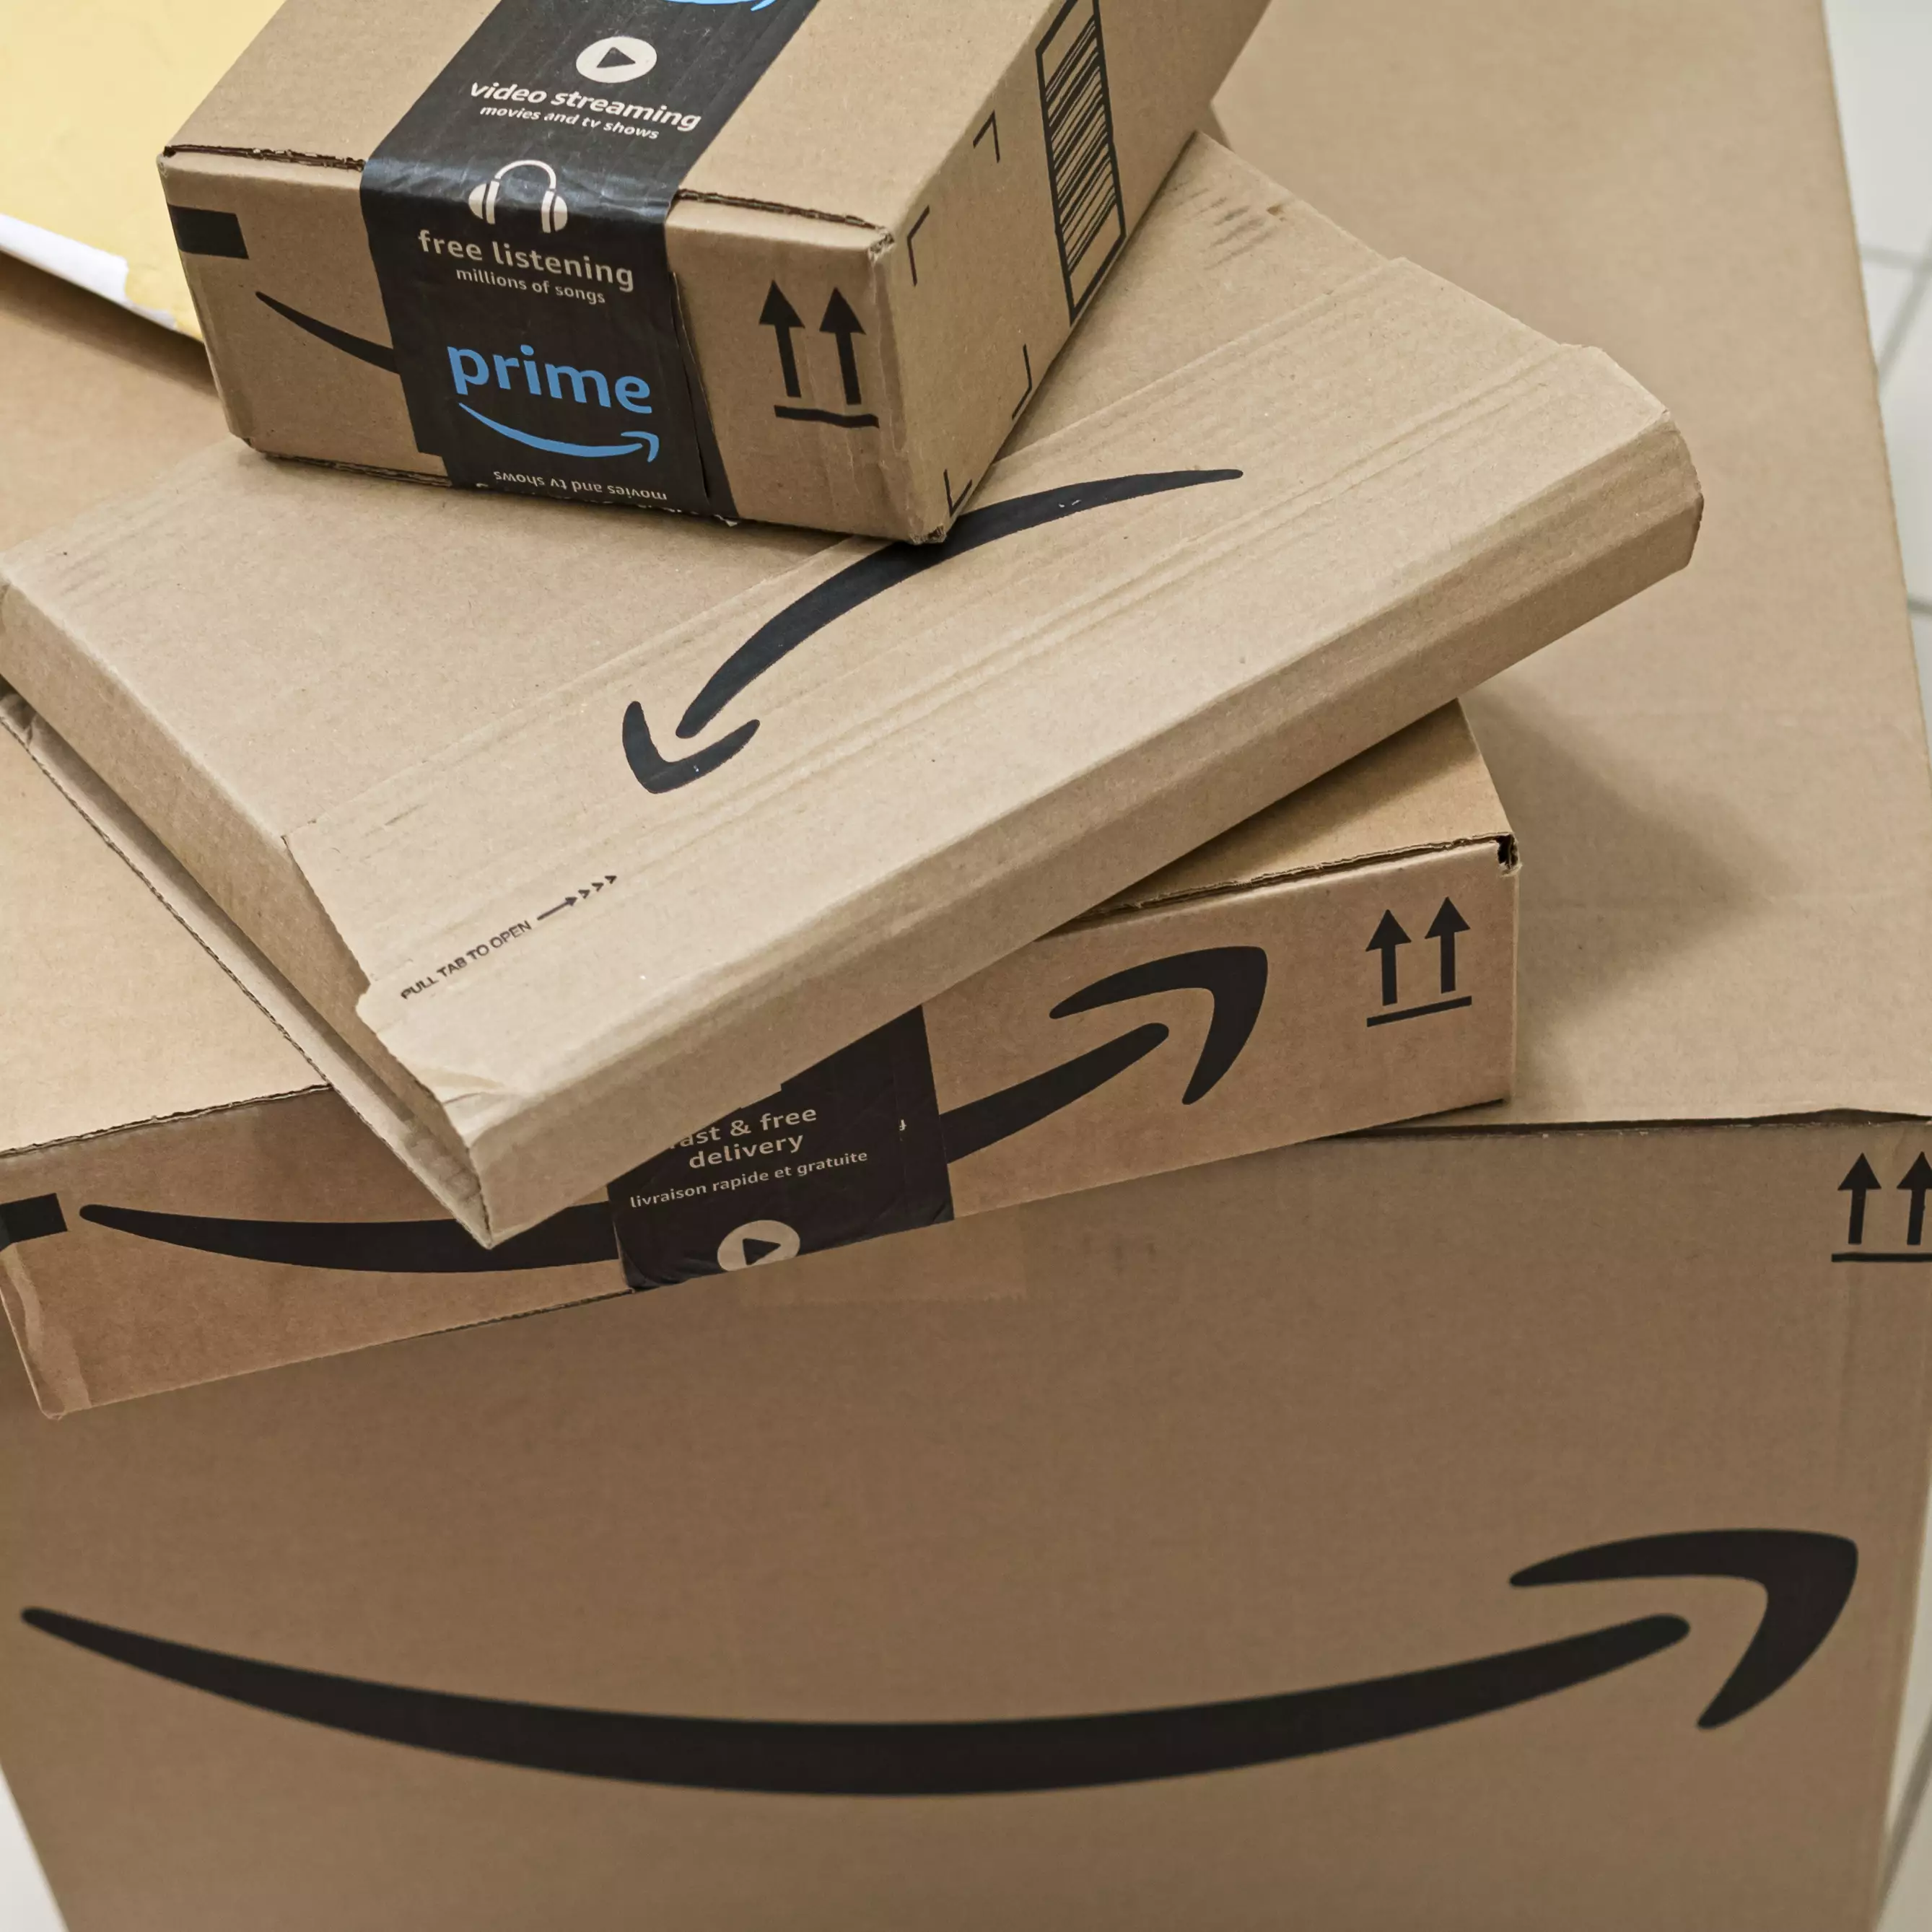 If you've been ordering loads off Amazon, you're obviously not alone.